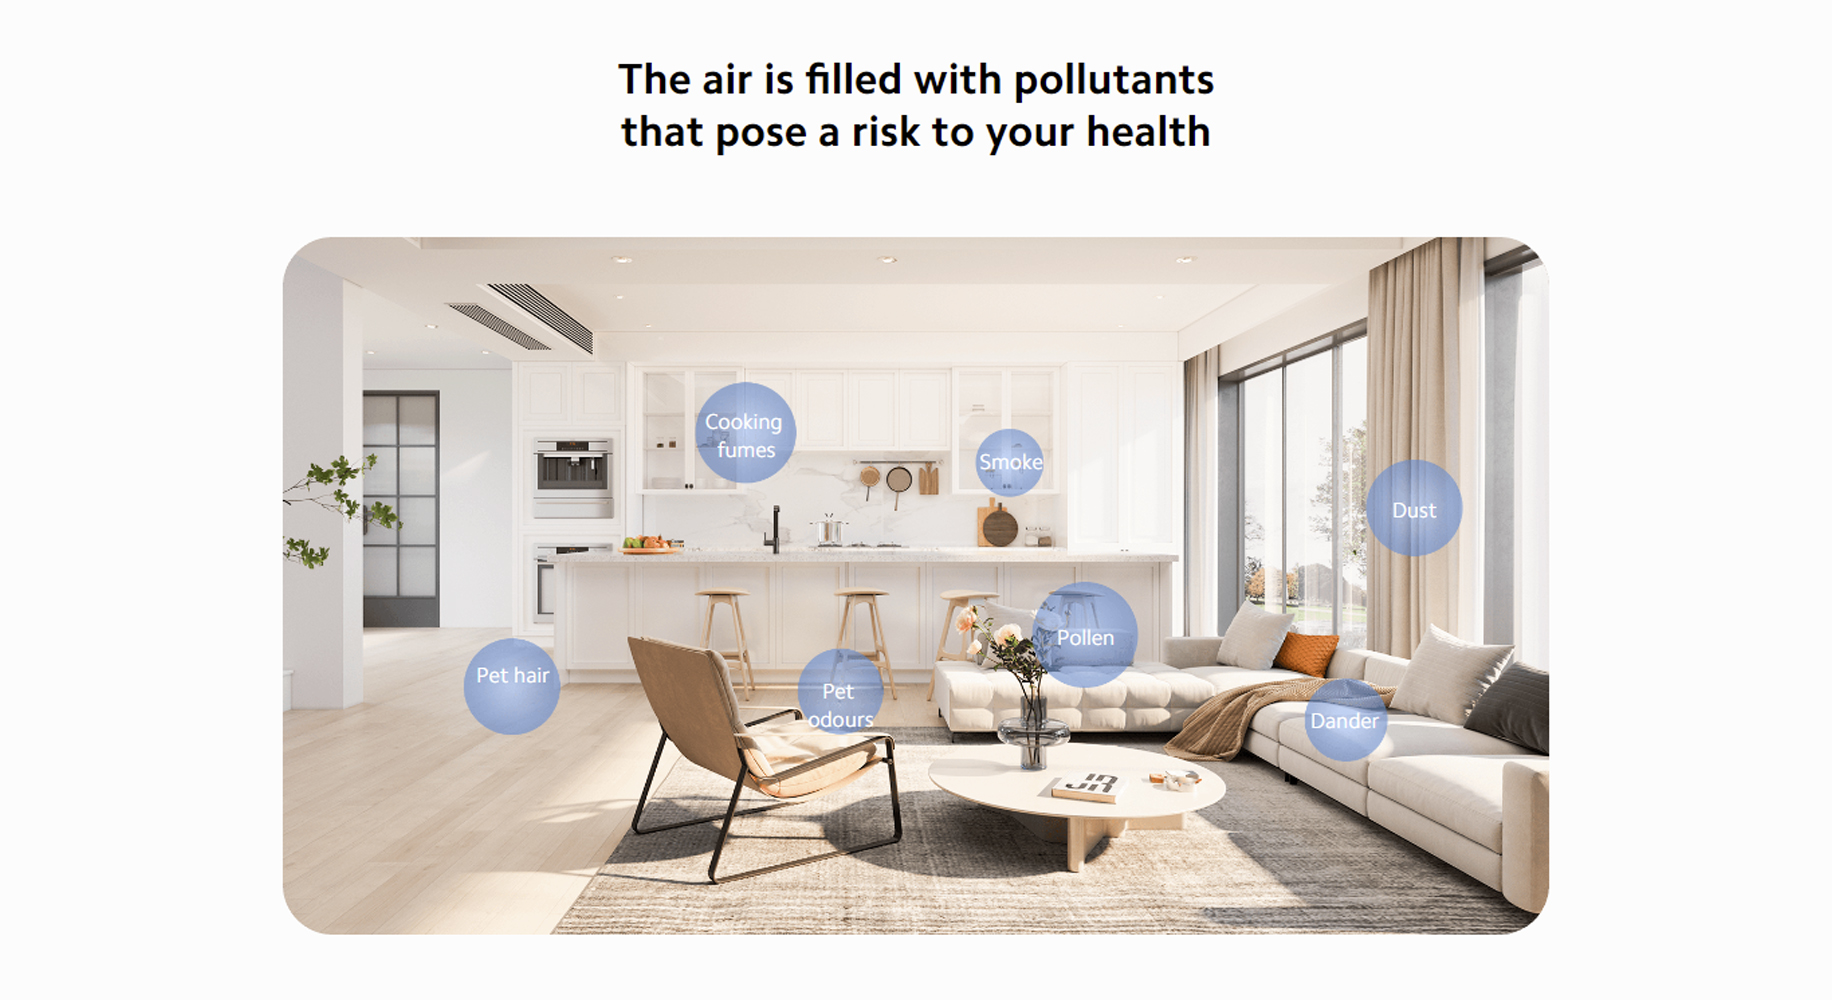 Xiaomi Smart Air Purifier 4 Pro Uk Appvoice Control Suitable For Large Room Cleaner Global Version 500 M3H Pm Cadr Oled Touch 17 Xiaomi &Lt;Table Class=&Quot;A-Normal A-Spacing-Micro&Quot;&Gt; &Lt;Tbody&Gt; &Lt;Tr Class=&Quot;A-Spacing-Small Po-Color&Quot;&Gt; &Lt;Td Class=&Quot;A-Span3&Quot;&Gt;&Lt;Span Class=&Quot;A-Size-Base A-Text-Bold&Quot;&Gt;Colour&Lt;/Span&Gt;&Lt;/Td&Gt; &Lt;Td Class=&Quot;A-Span9&Quot;&Gt;&Lt;Span Class=&Quot;A-Size-Base Po-Break-Word&Quot;&Gt;White&Lt;/Span&Gt;&Lt;/Td&Gt; &Lt;/Tr&Gt; &Lt;Tr Class=&Quot;A-Spacing-Small Po-Brand&Quot;&Gt; &Lt;Td Class=&Quot;A-Span3&Quot;&Gt;&Lt;Span Class=&Quot;A-Size-Base A-Text-Bold&Quot;&Gt;Brand&Lt;/Span&Gt;&Lt;/Td&Gt; &Lt;Td Class=&Quot;A-Span9&Quot;&Gt;&Lt;Span Class=&Quot;A-Size-Base Po-Break-Word&Quot;&Gt;Xiaomi&Lt;/Span&Gt;&Lt;/Td&Gt; &Lt;/Tr&Gt; &Lt;Tr Class=&Quot;A-Spacing-Small Po-Item_Depth_Width_Height&Quot;&Gt; &Lt;Td Class=&Quot;A-Span3&Quot;&Gt;&Lt;Span Class=&Quot;A-Size-Base A-Text-Bold&Quot;&Gt;Product Dimensions&Lt;/Span&Gt;&Lt;/Td&Gt; &Lt;Td Class=&Quot;A-Span9&Quot;&Gt;&Lt;Span Class=&Quot;A-Size-Base Po-Break-Word&Quot;&Gt;27.5D X 27.5W X 68H Centimeters&Lt;/Span&Gt;&Lt;/Td&Gt; &Lt;/Tr&Gt; &Lt;Tr Class=&Quot;A-Spacing-Small Po-Power_Source_Type&Quot;&Gt; &Lt;Td Class=&Quot;A-Span3&Quot;&Gt;&Lt;Span Class=&Quot;A-Size-Base A-Text-Bold&Quot;&Gt;Power Source&Lt;/Span&Gt;&Lt;/Td&Gt; &Lt;Td Class=&Quot;A-Span9&Quot;&Gt;&Lt;Span Class=&Quot;A-Size-Base Po-Break-Word&Quot;&Gt;Corded Electric&Lt;/Span&Gt;&Lt;/Td&Gt; &Lt;/Tr&Gt; &Lt;Tr Class=&Quot;A-Spacing-Small Po-Item_Weight&Quot;&Gt; &Lt;Td Class=&Quot;A-Span3&Quot;&Gt;&Lt;Span Class=&Quot;A-Size-Base A-Text-Bold&Quot;&Gt;Item Weight&Lt;/Span&Gt;&Lt;/Td&Gt; &Lt;Td Class=&Quot;A-Span9&Quot;&Gt;&Lt;Span Class=&Quot;A-Size-Base Po-Break-Word&Quot;&Gt;6.8 Kilograms&Lt;/Span&Gt;&Lt;/Td&Gt; &Lt;/Tr&Gt; &Lt;/Tbody&Gt; &Lt;/Table&Gt; &Lt;H5&Gt;We Also Provide International Wholesale And Retail Shipping To All Gcc Countries: Saudi Arabia, Qatar, Oman, Kuwait, Bahrain.&Lt;/H5&Gt; Xiaomi Xiaomi Smart Air Purifier 4 Pro